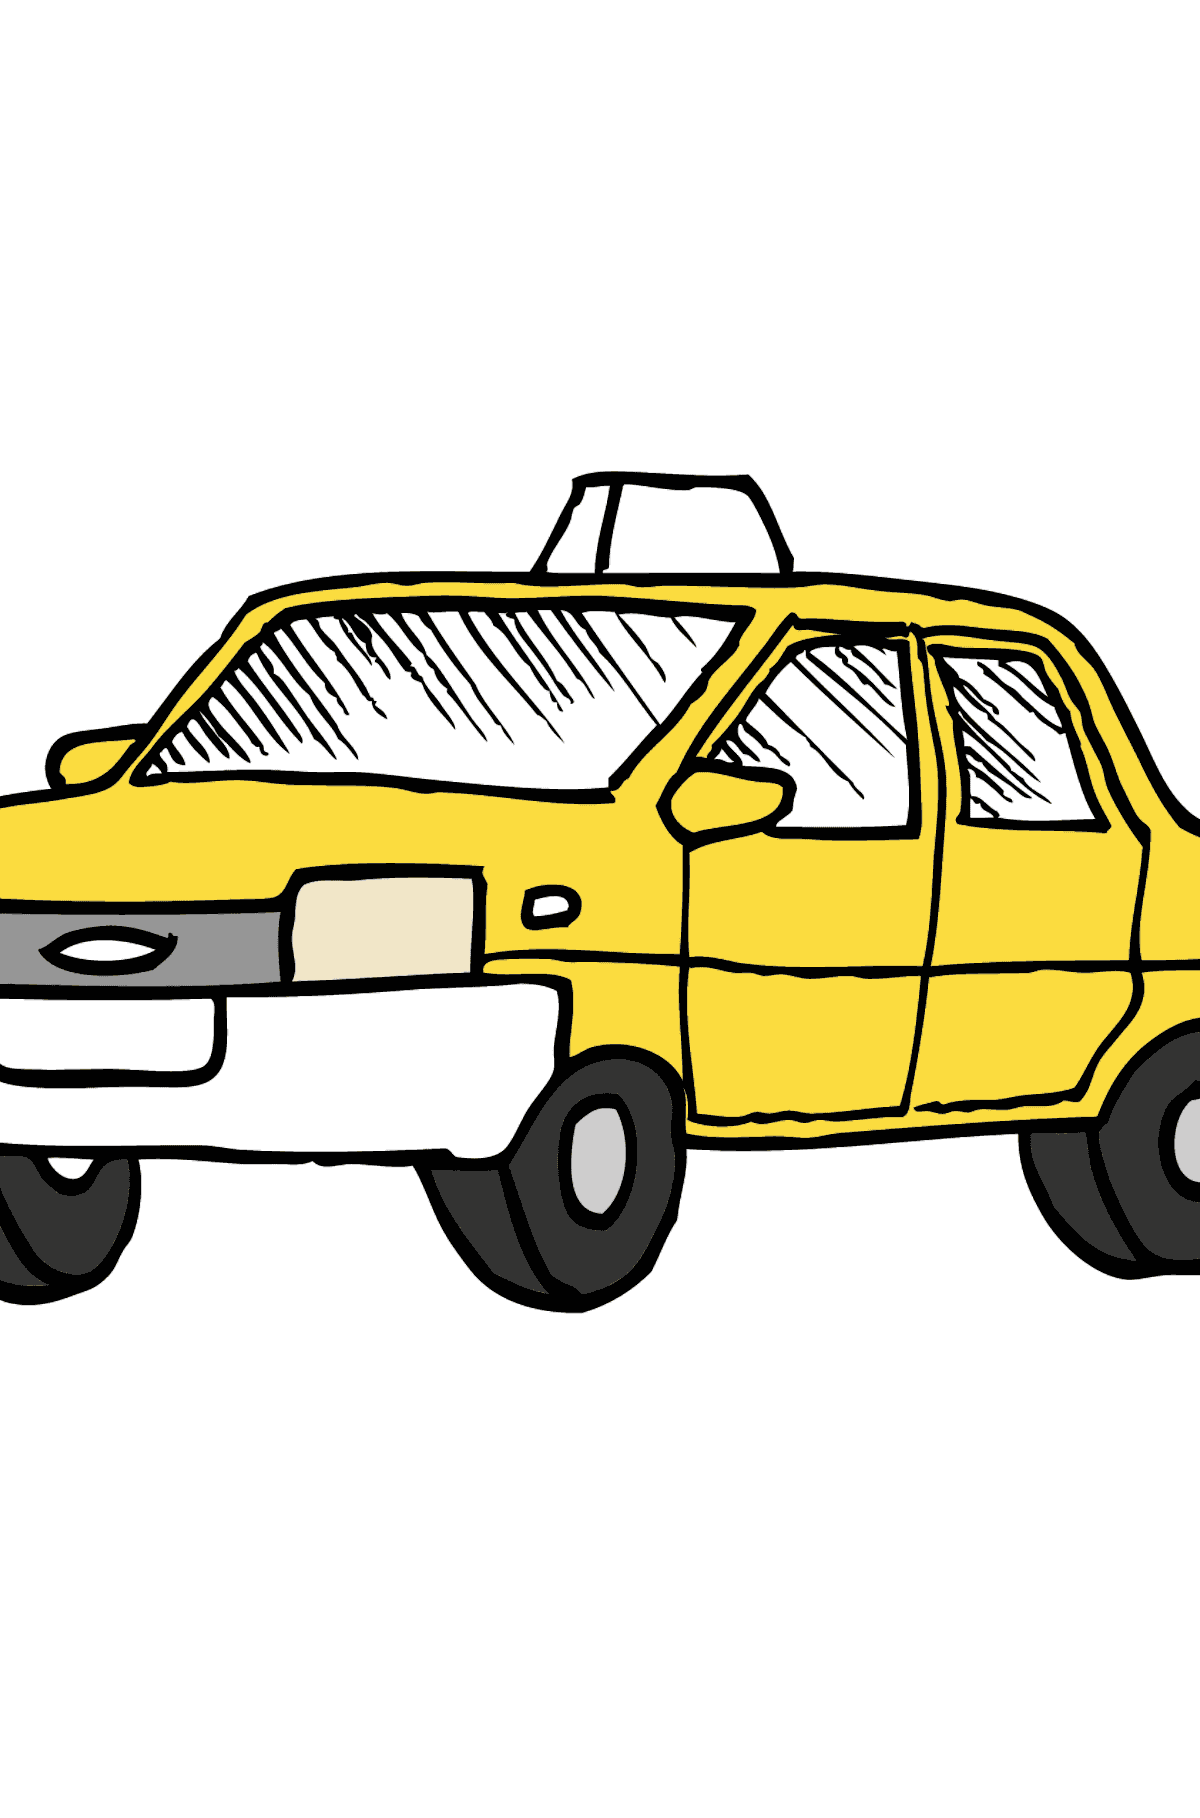 Coloring Page - A Yellow Taxi - Coloring Pages for Kids